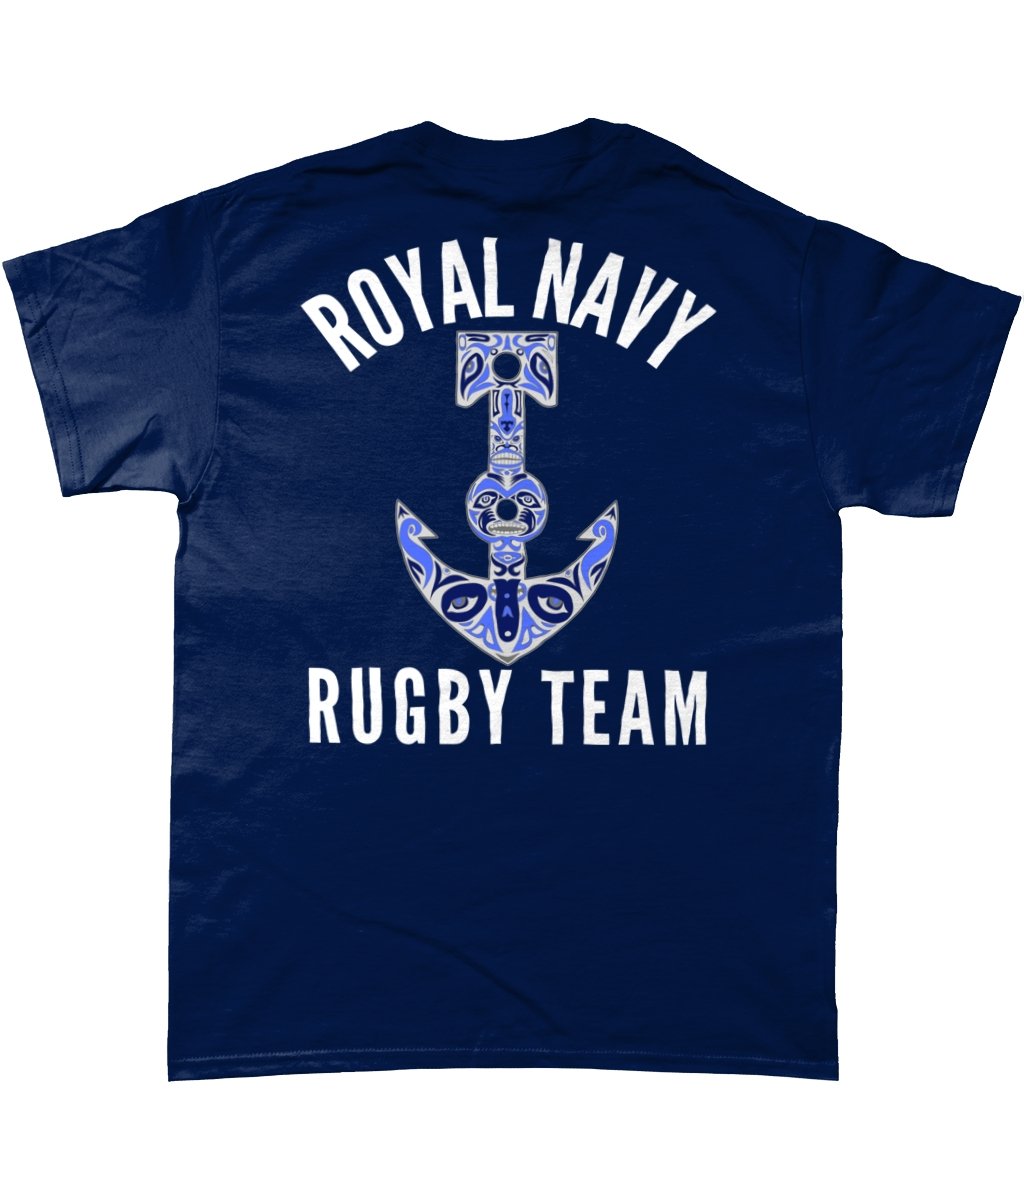 Official Royal Navy Rugby Team Tee - The Chits Inn